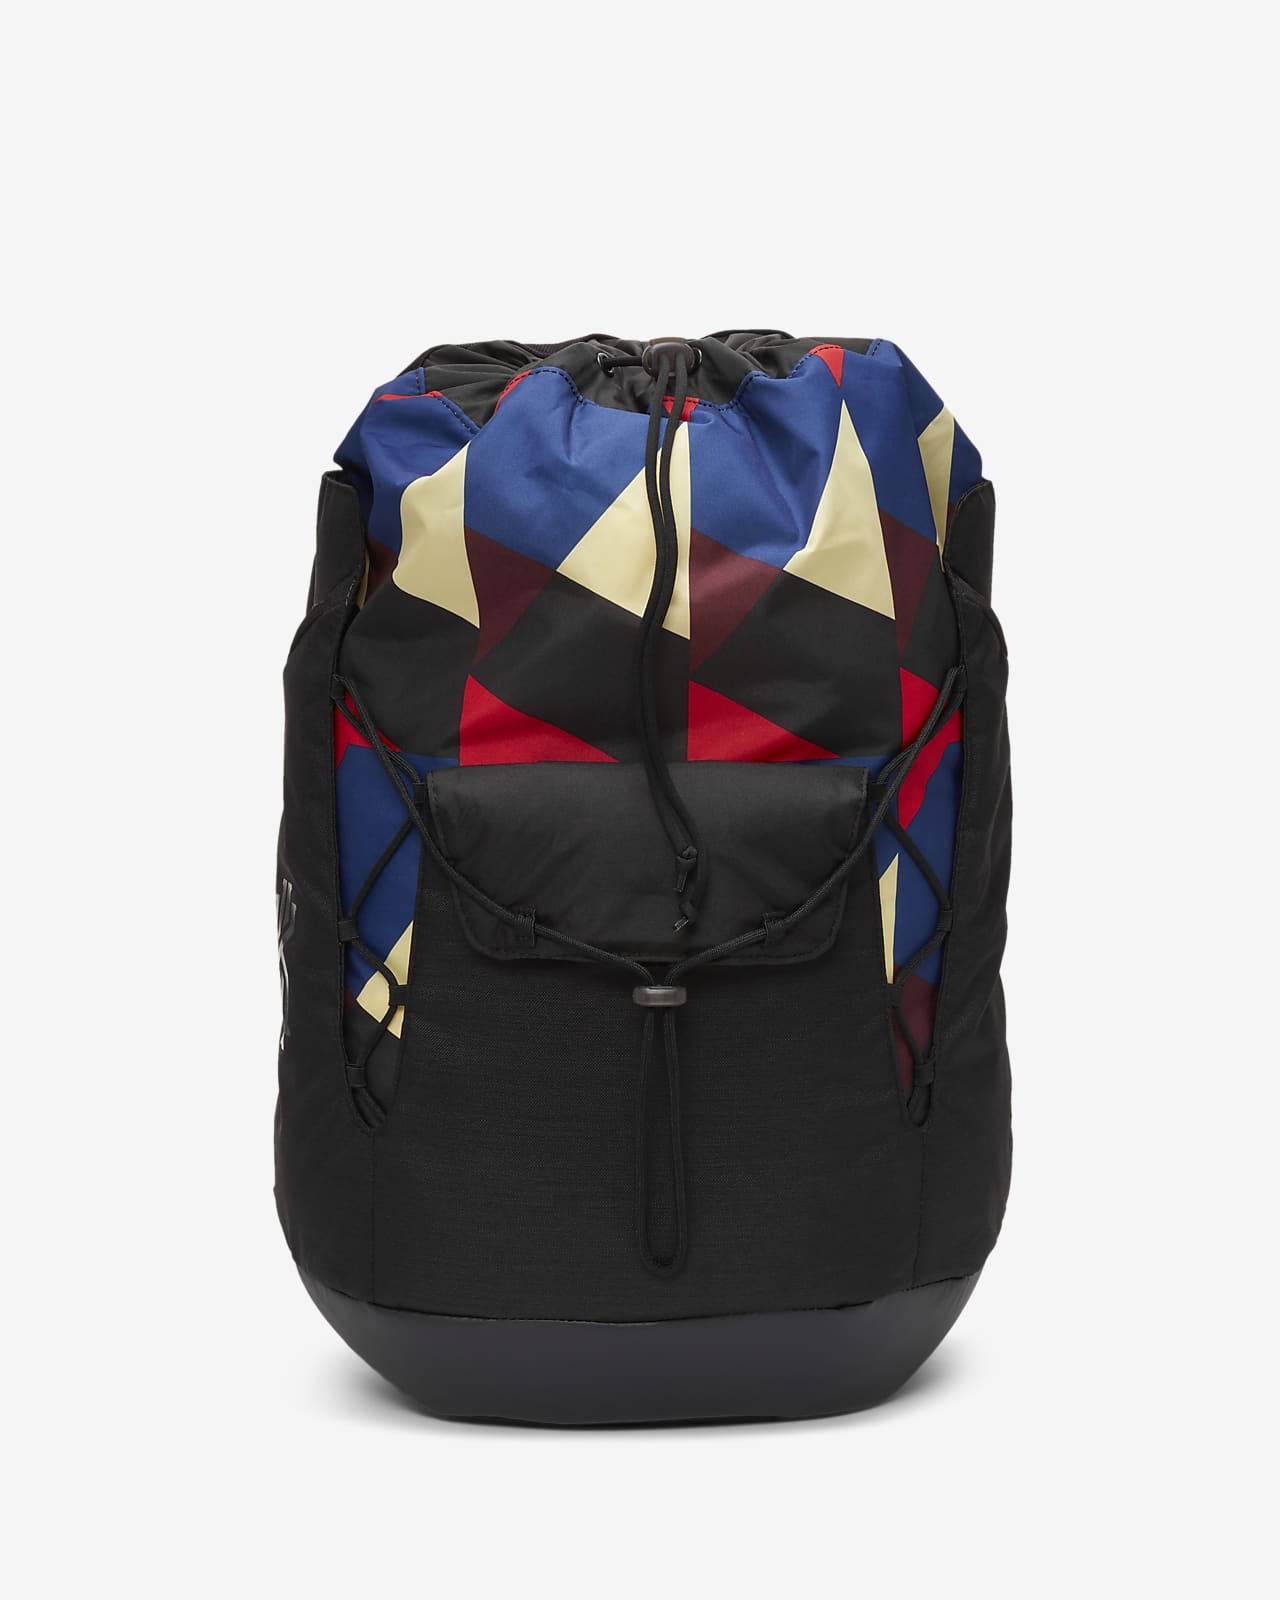 kyrie backpack review